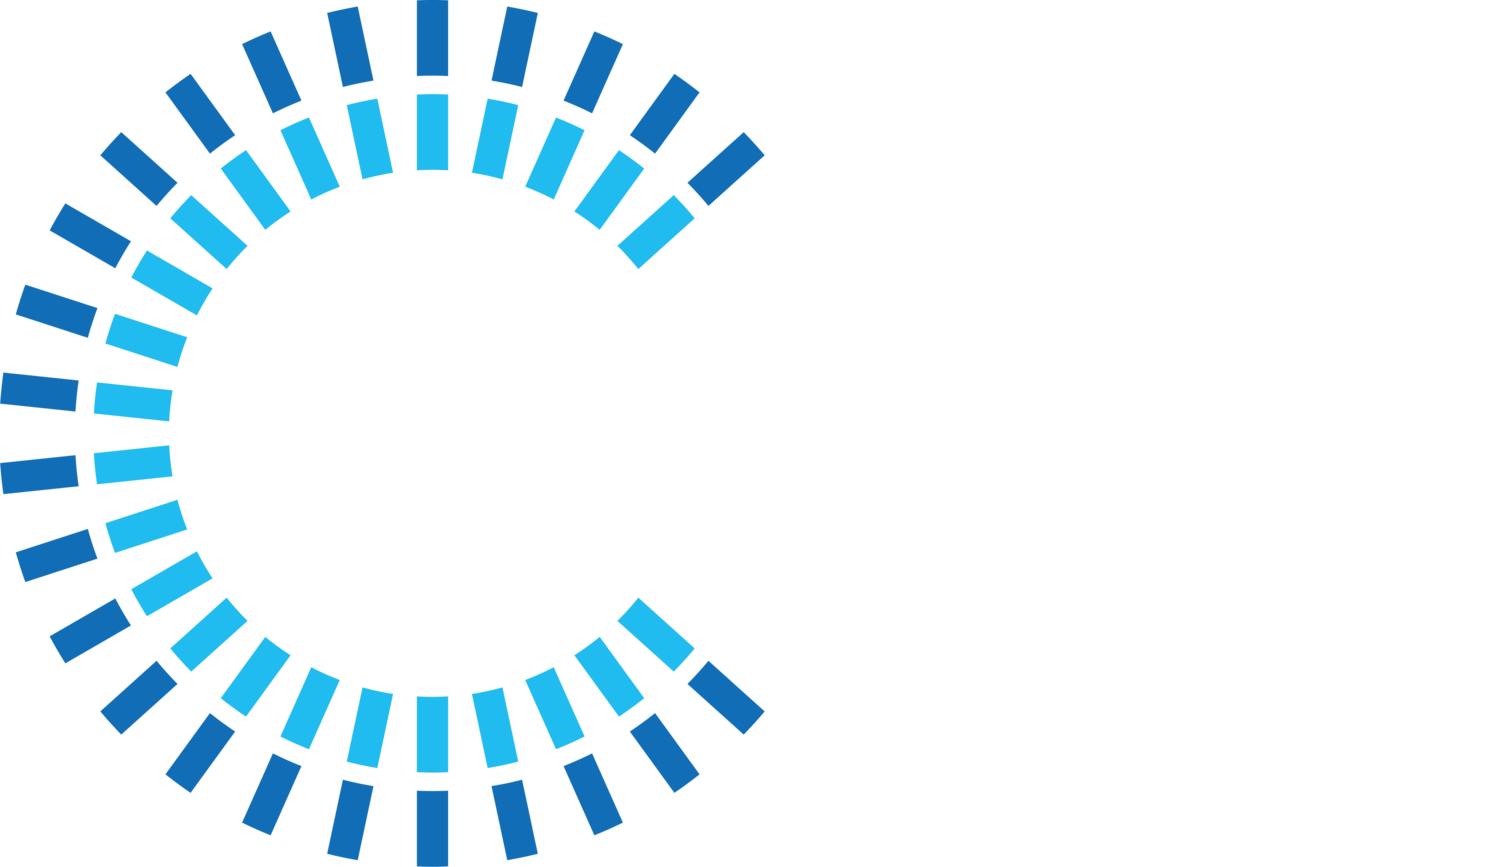 CBS Case Competition